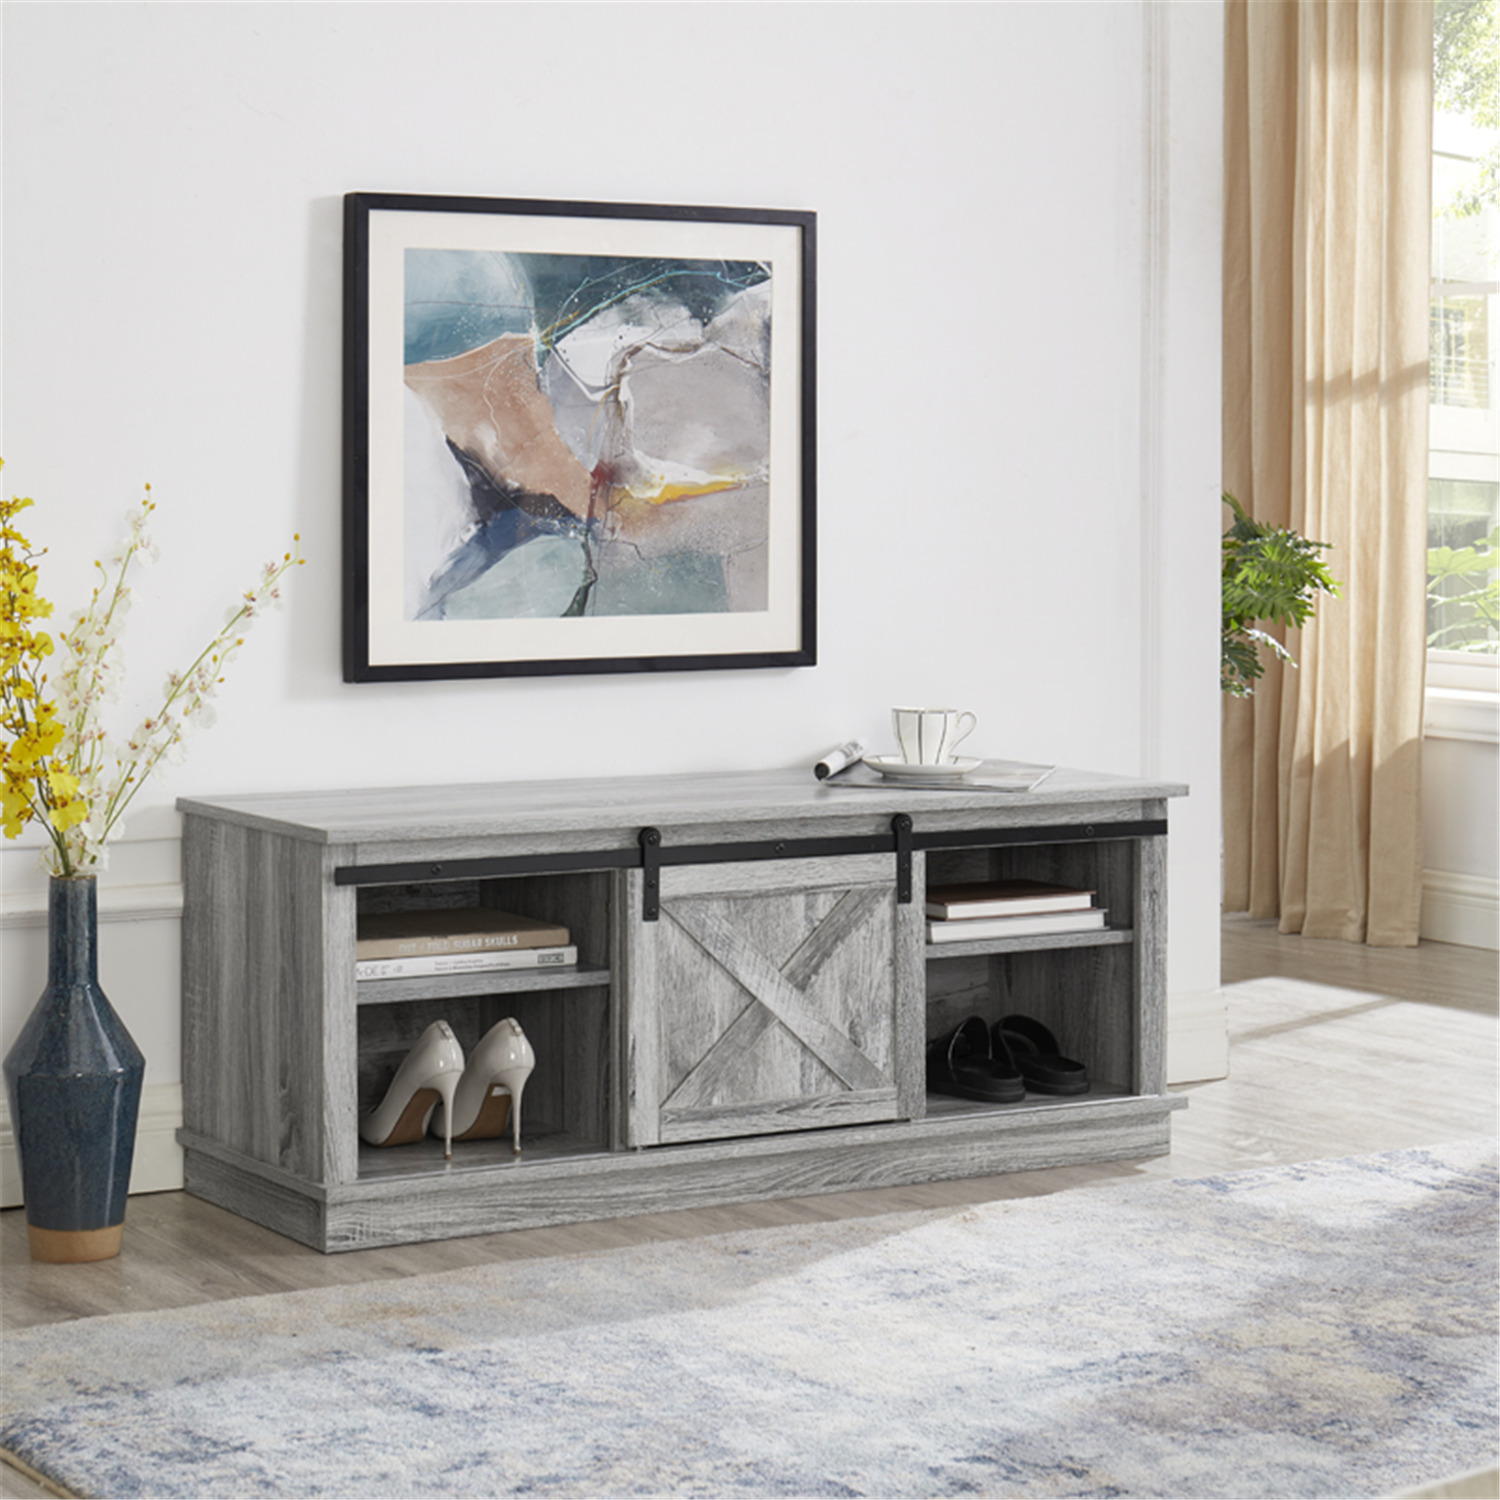 Naomi Home Shelby Sliding Barn Door TV Stand for 50" TV with Storage Shelf, Bedroom Furniture Choices To Personalize Your Private Sanctuary